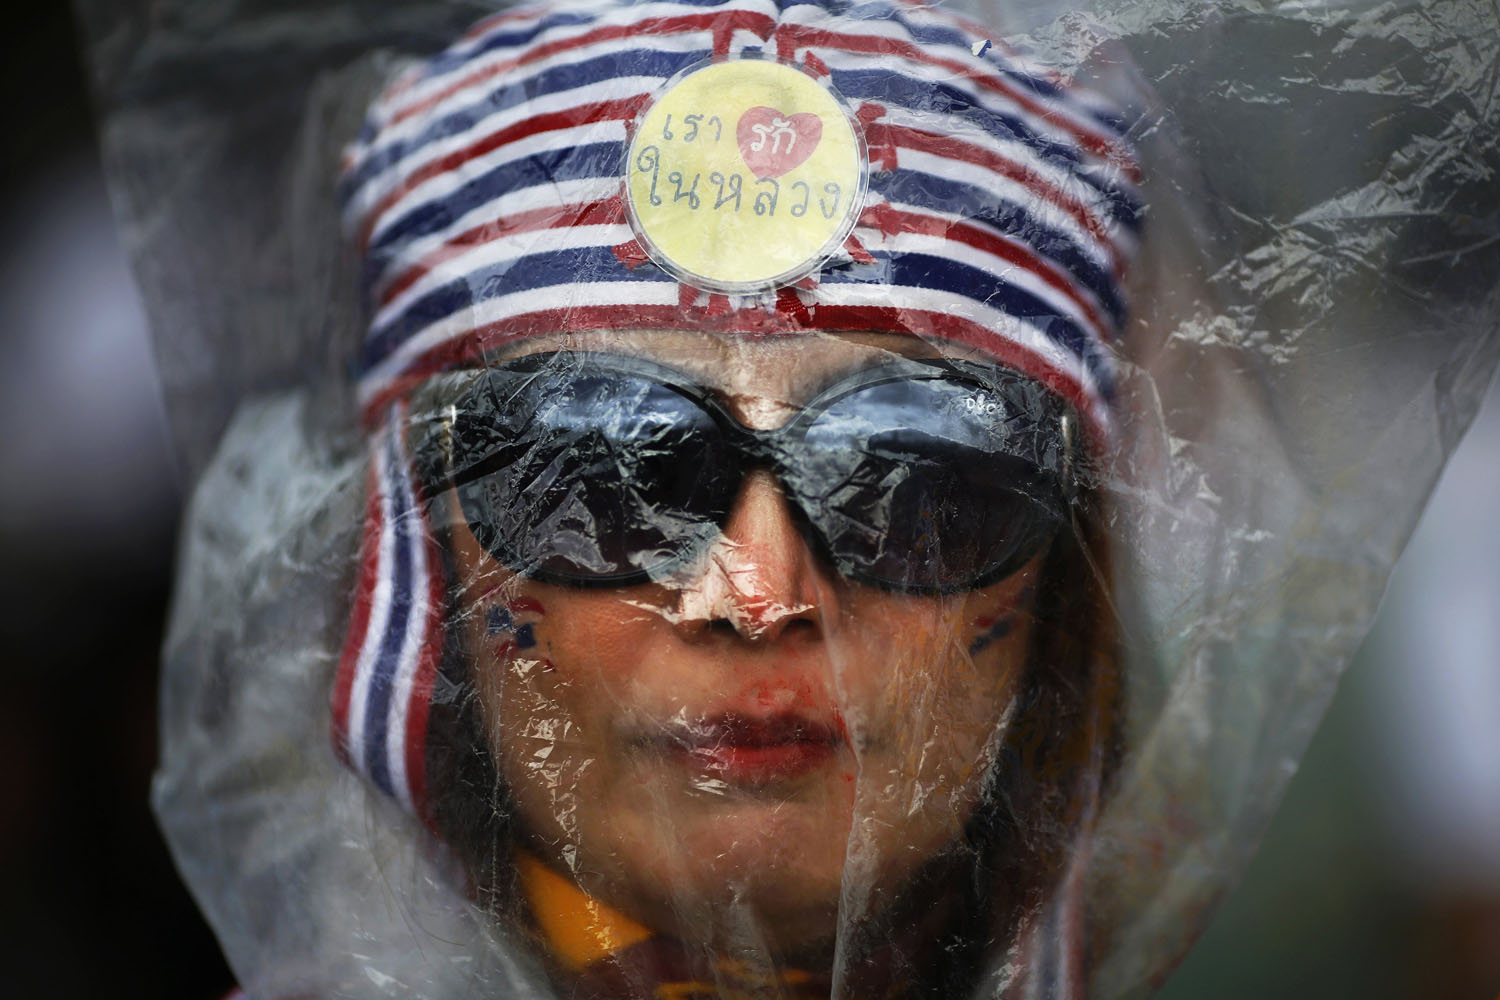 A protester against an amnesty bill wears a plastic bag over her head in front of police barricades on the main road near the government and parliament buildings in central Bangkok